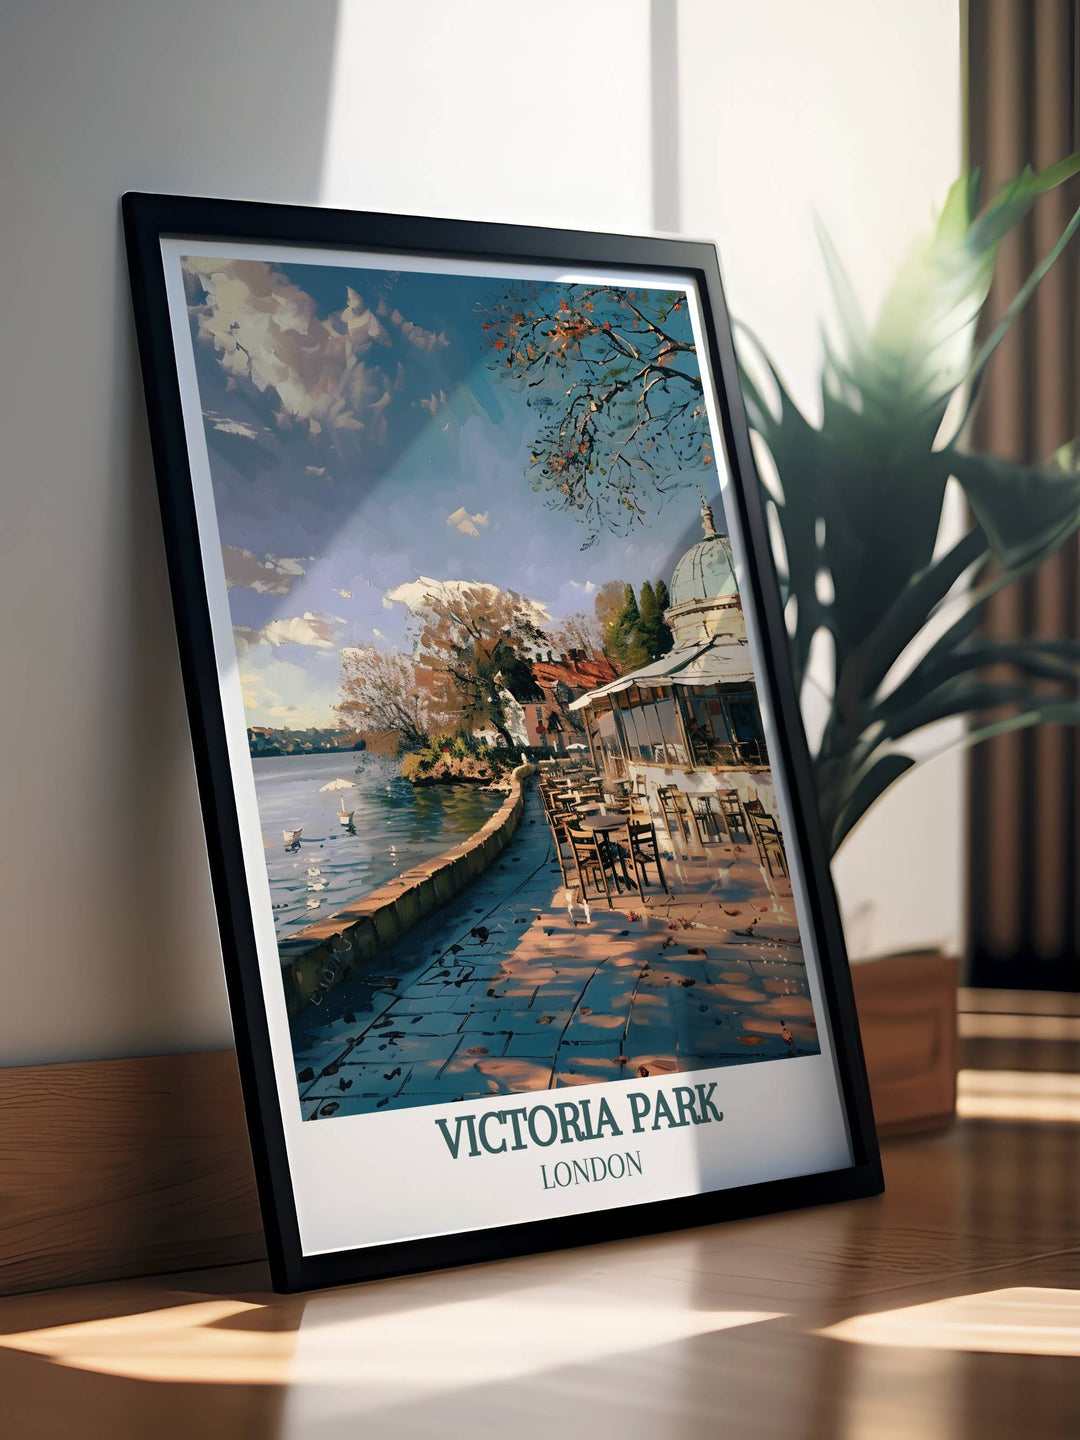 The Pavilion Café poster capturing the historic charm and peaceful setting of East Londons hidden gem perfect for creating a calming environment.